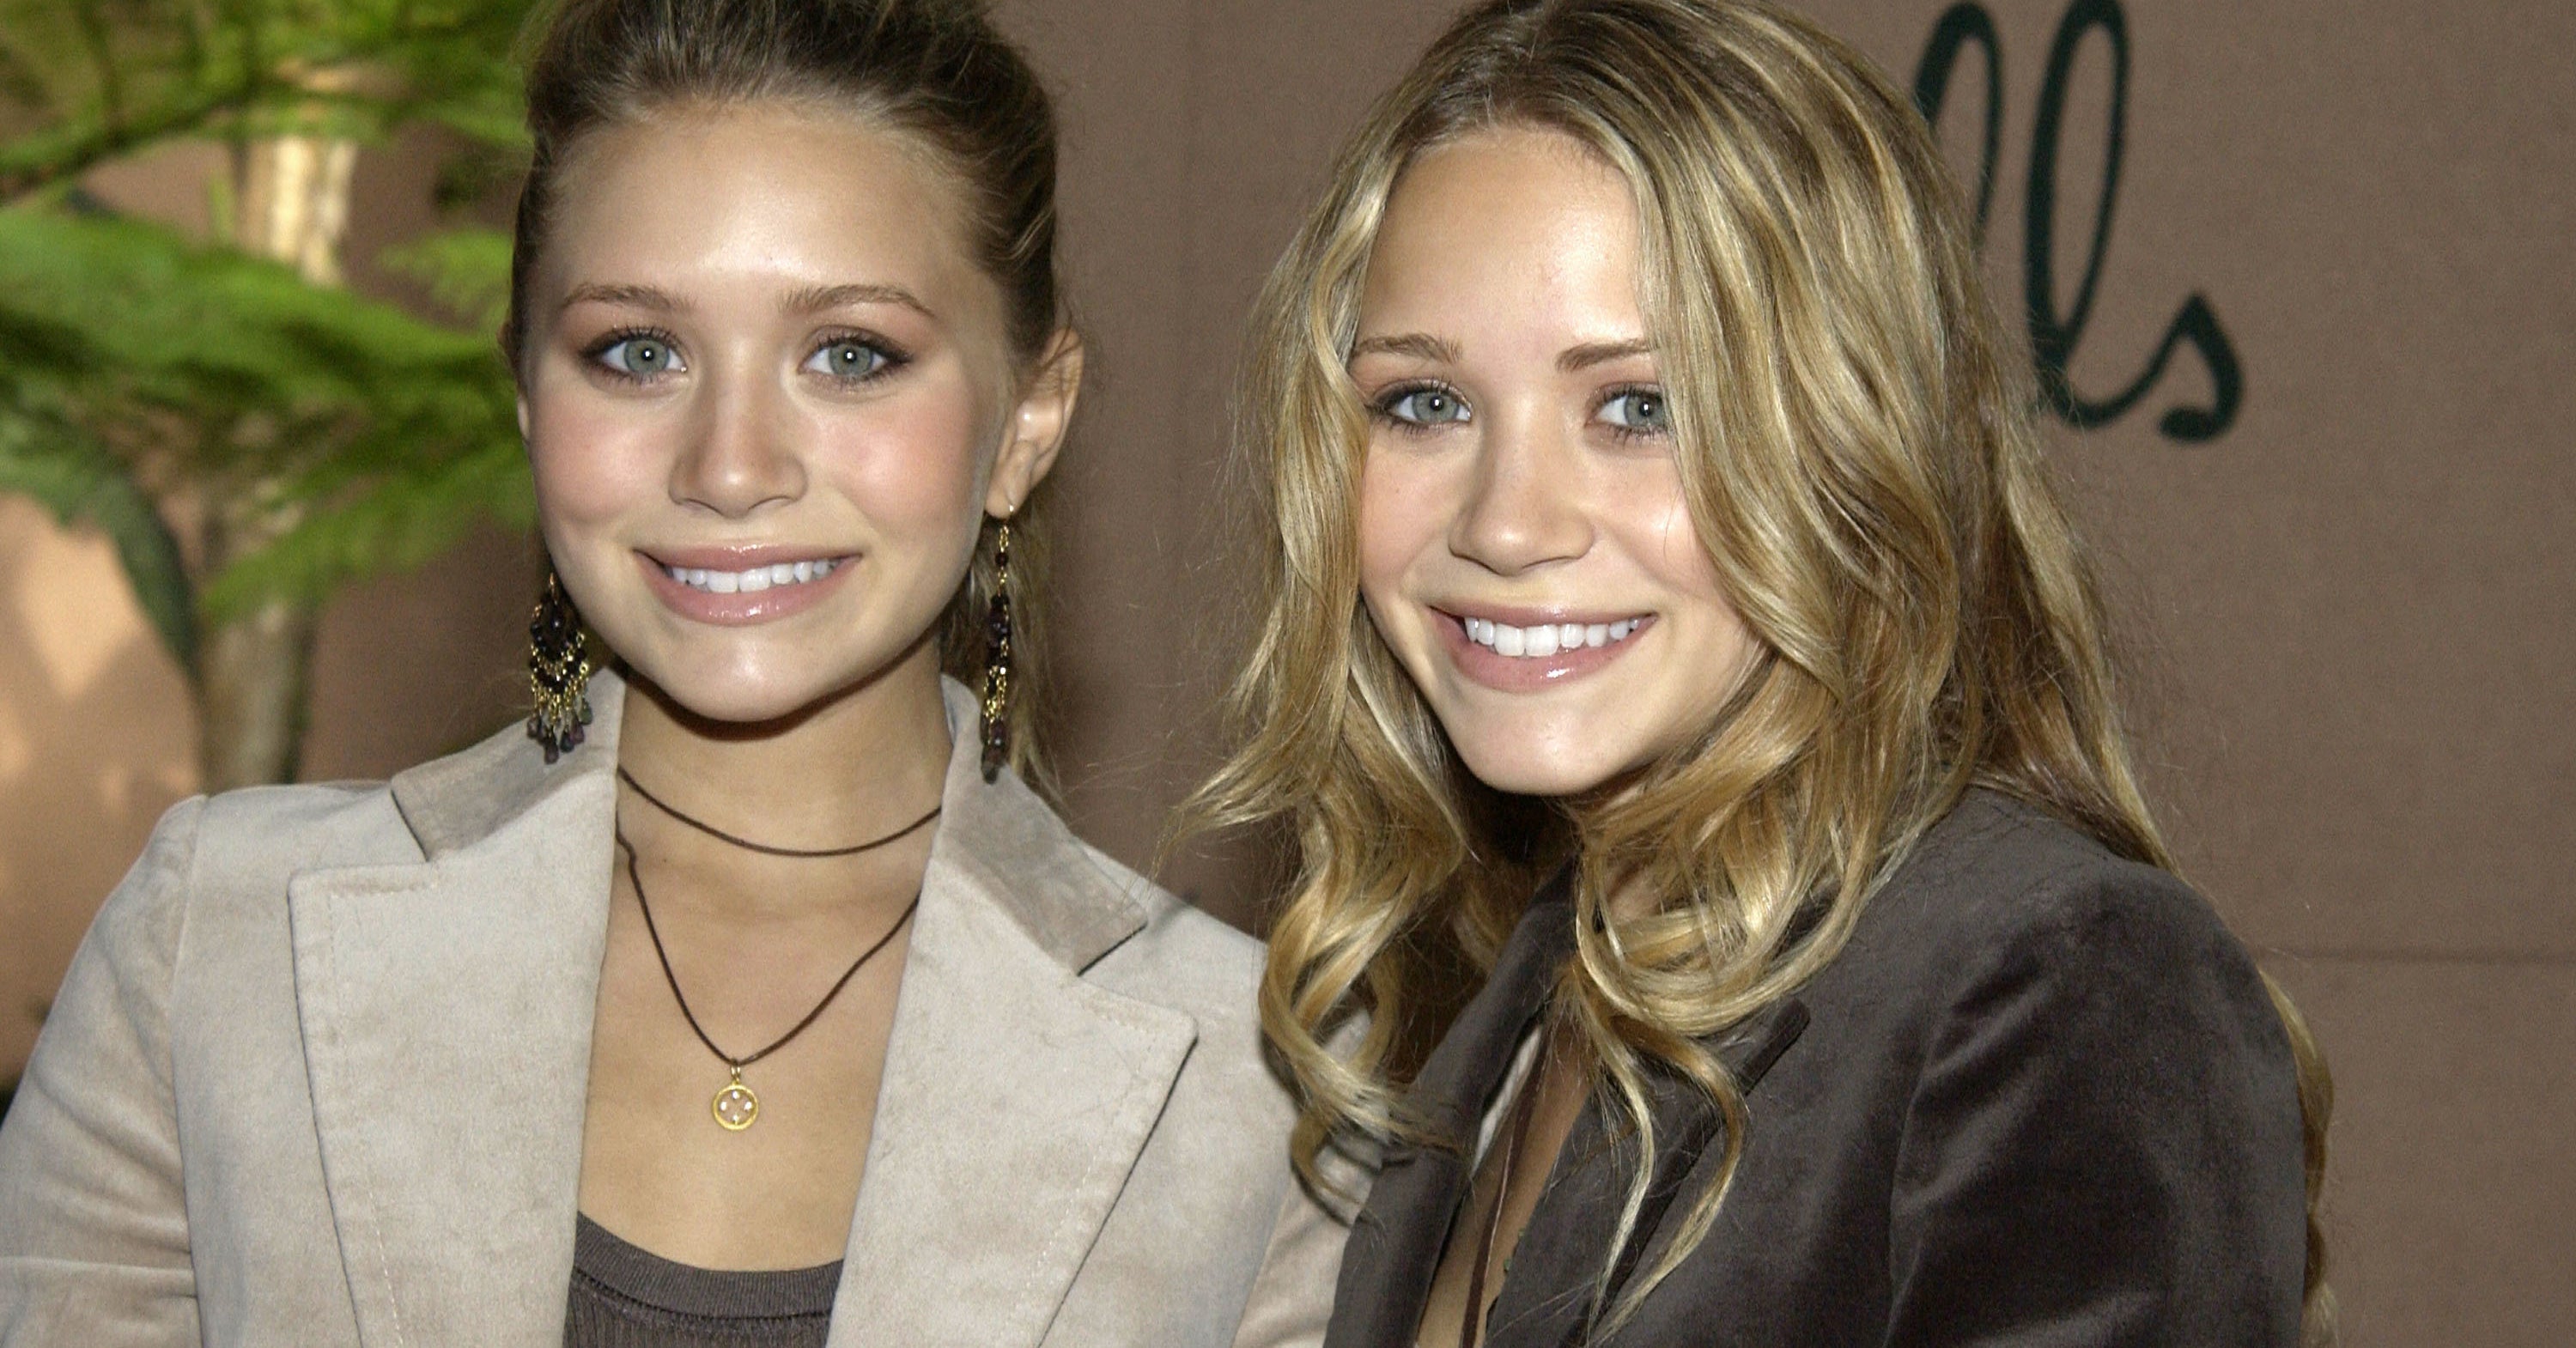 Only A True '00s Girl Can Get Over 5/7 In This Olsen Twins Quiz